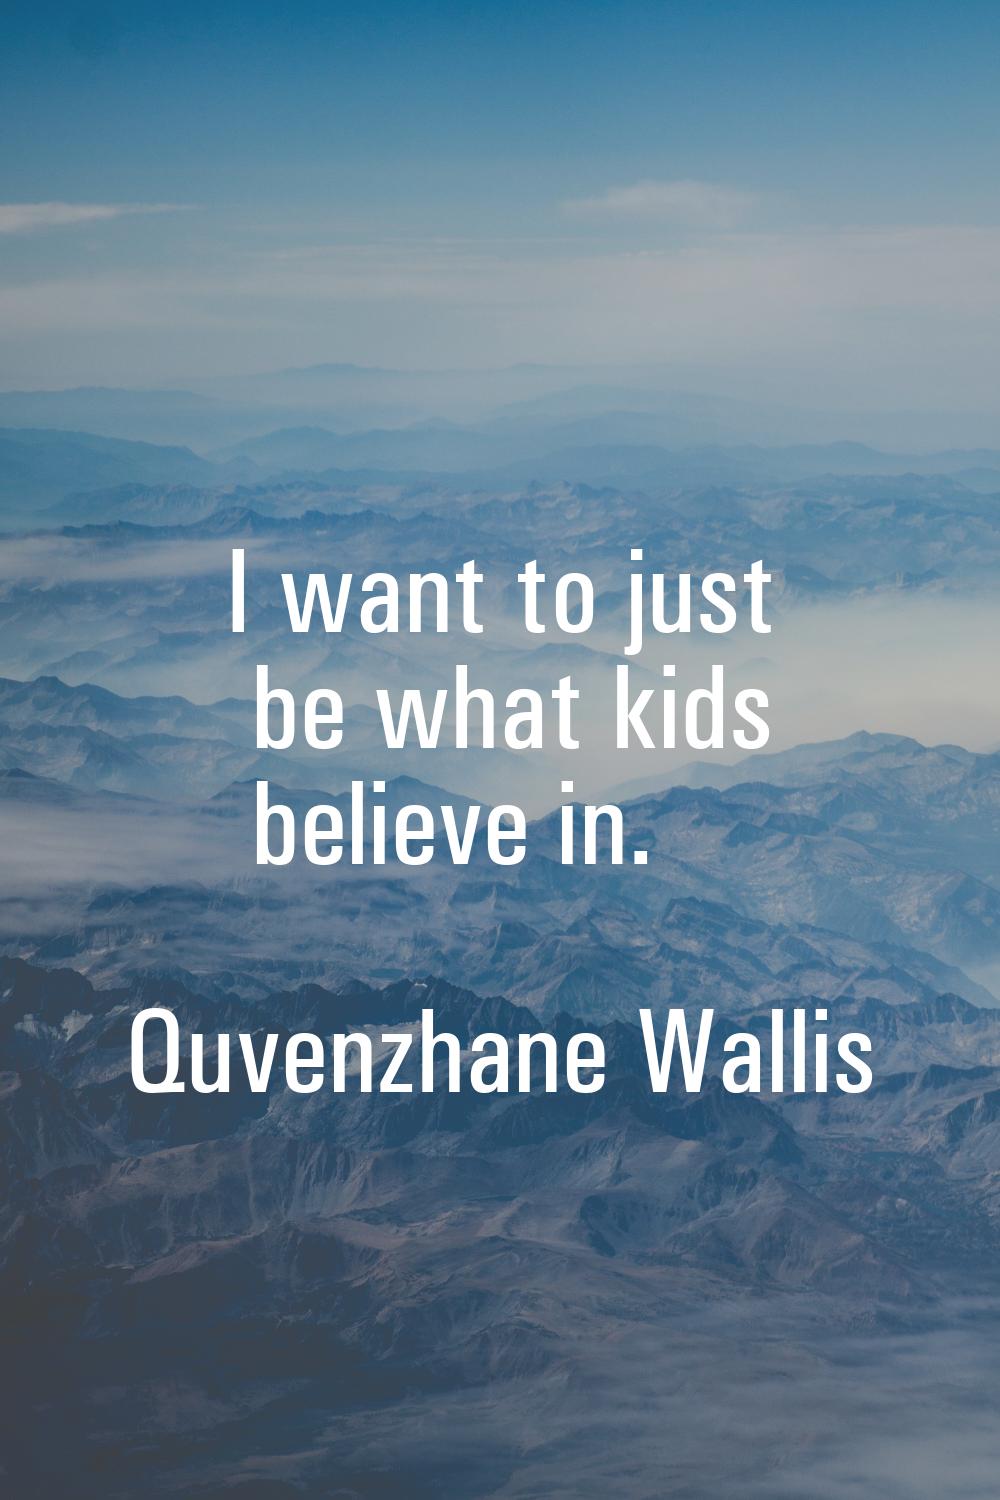 I want to just be what kids believe in.